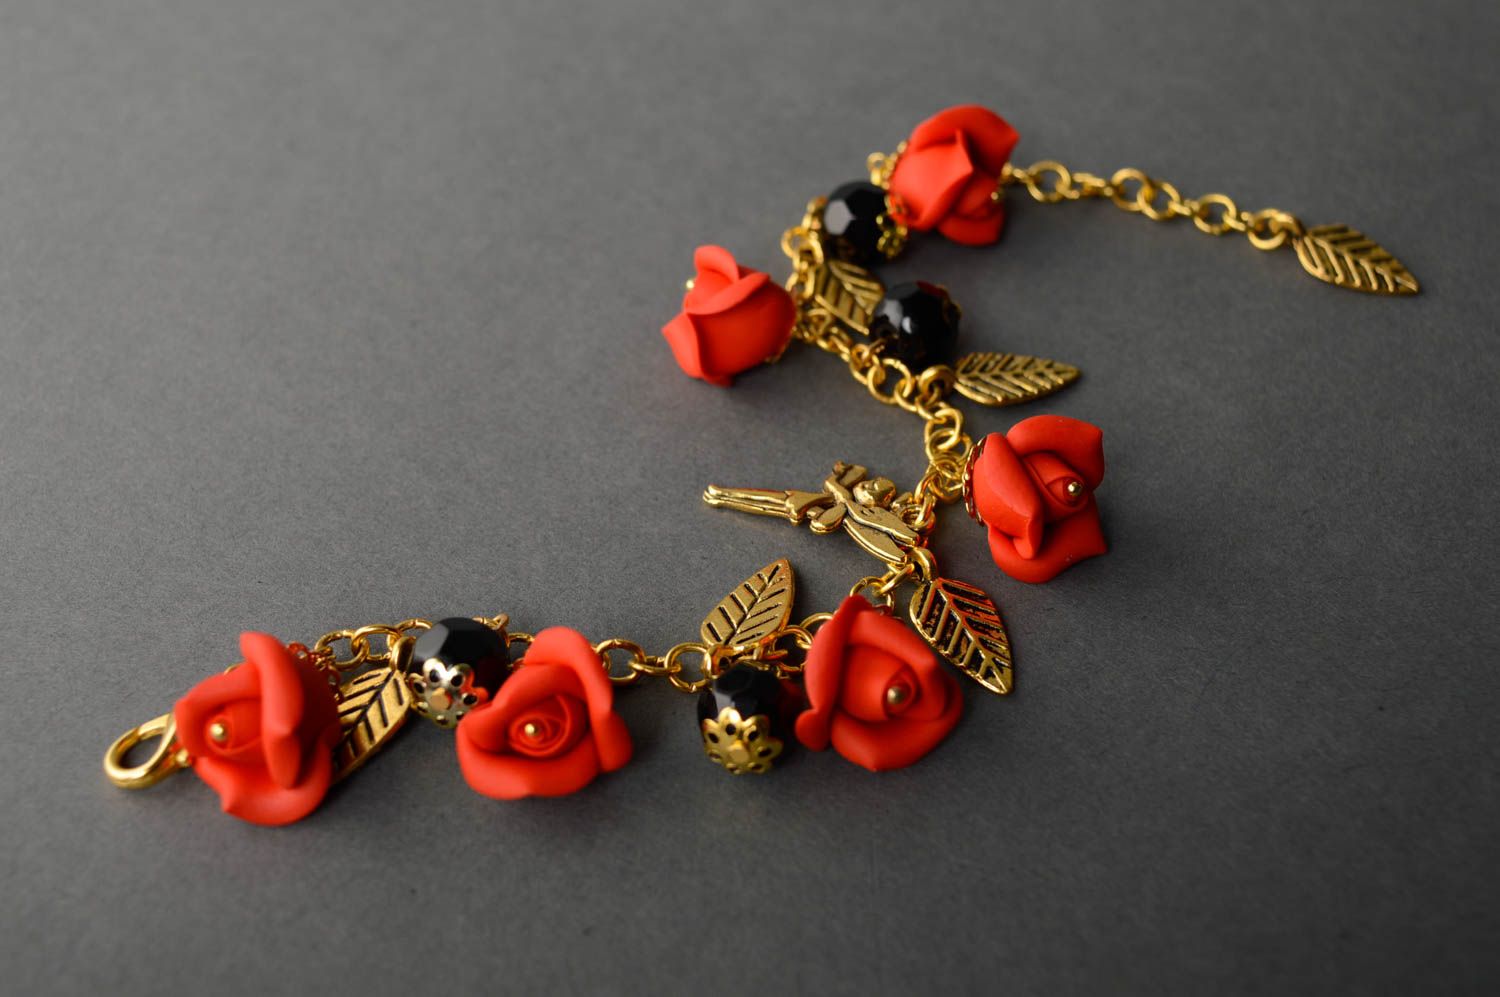 Wrist polymer clay bracelet Red Roses photo 1